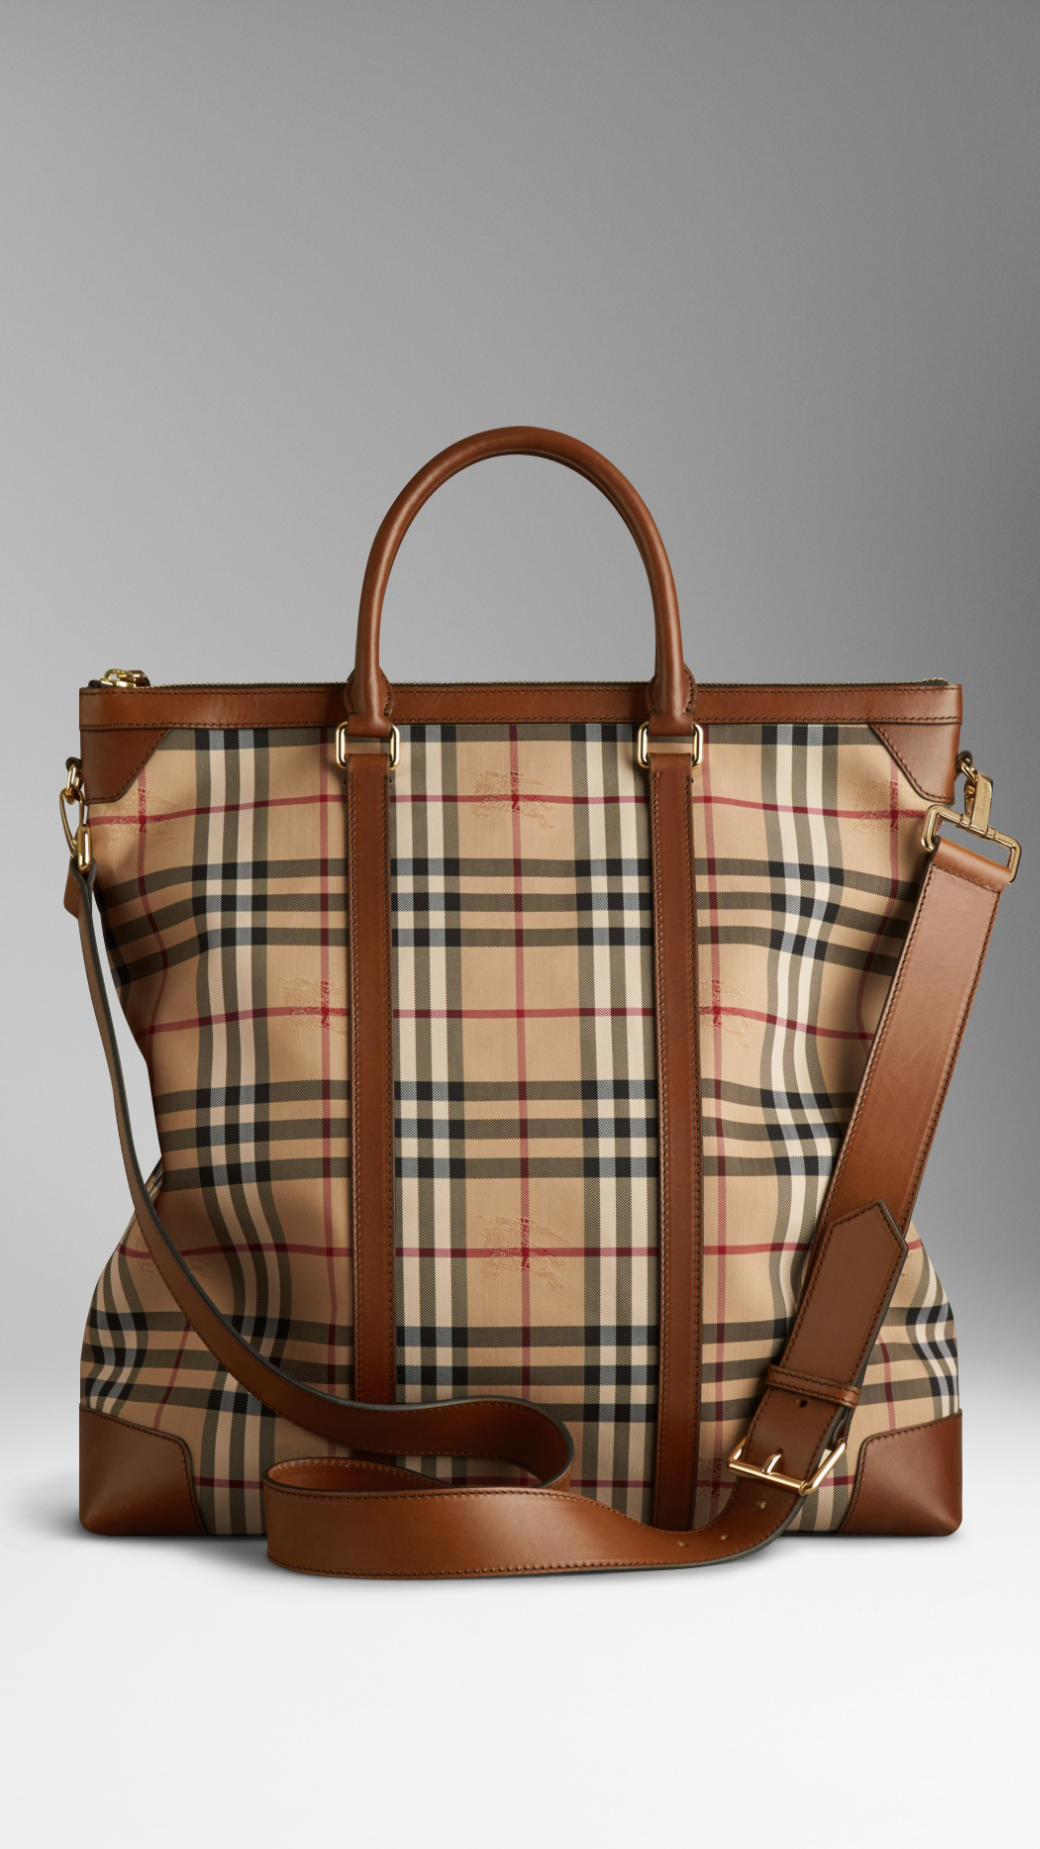 Burberry Large Horseferry Check Leather Tote Bag in Tan (Brown) for Men - Lyst